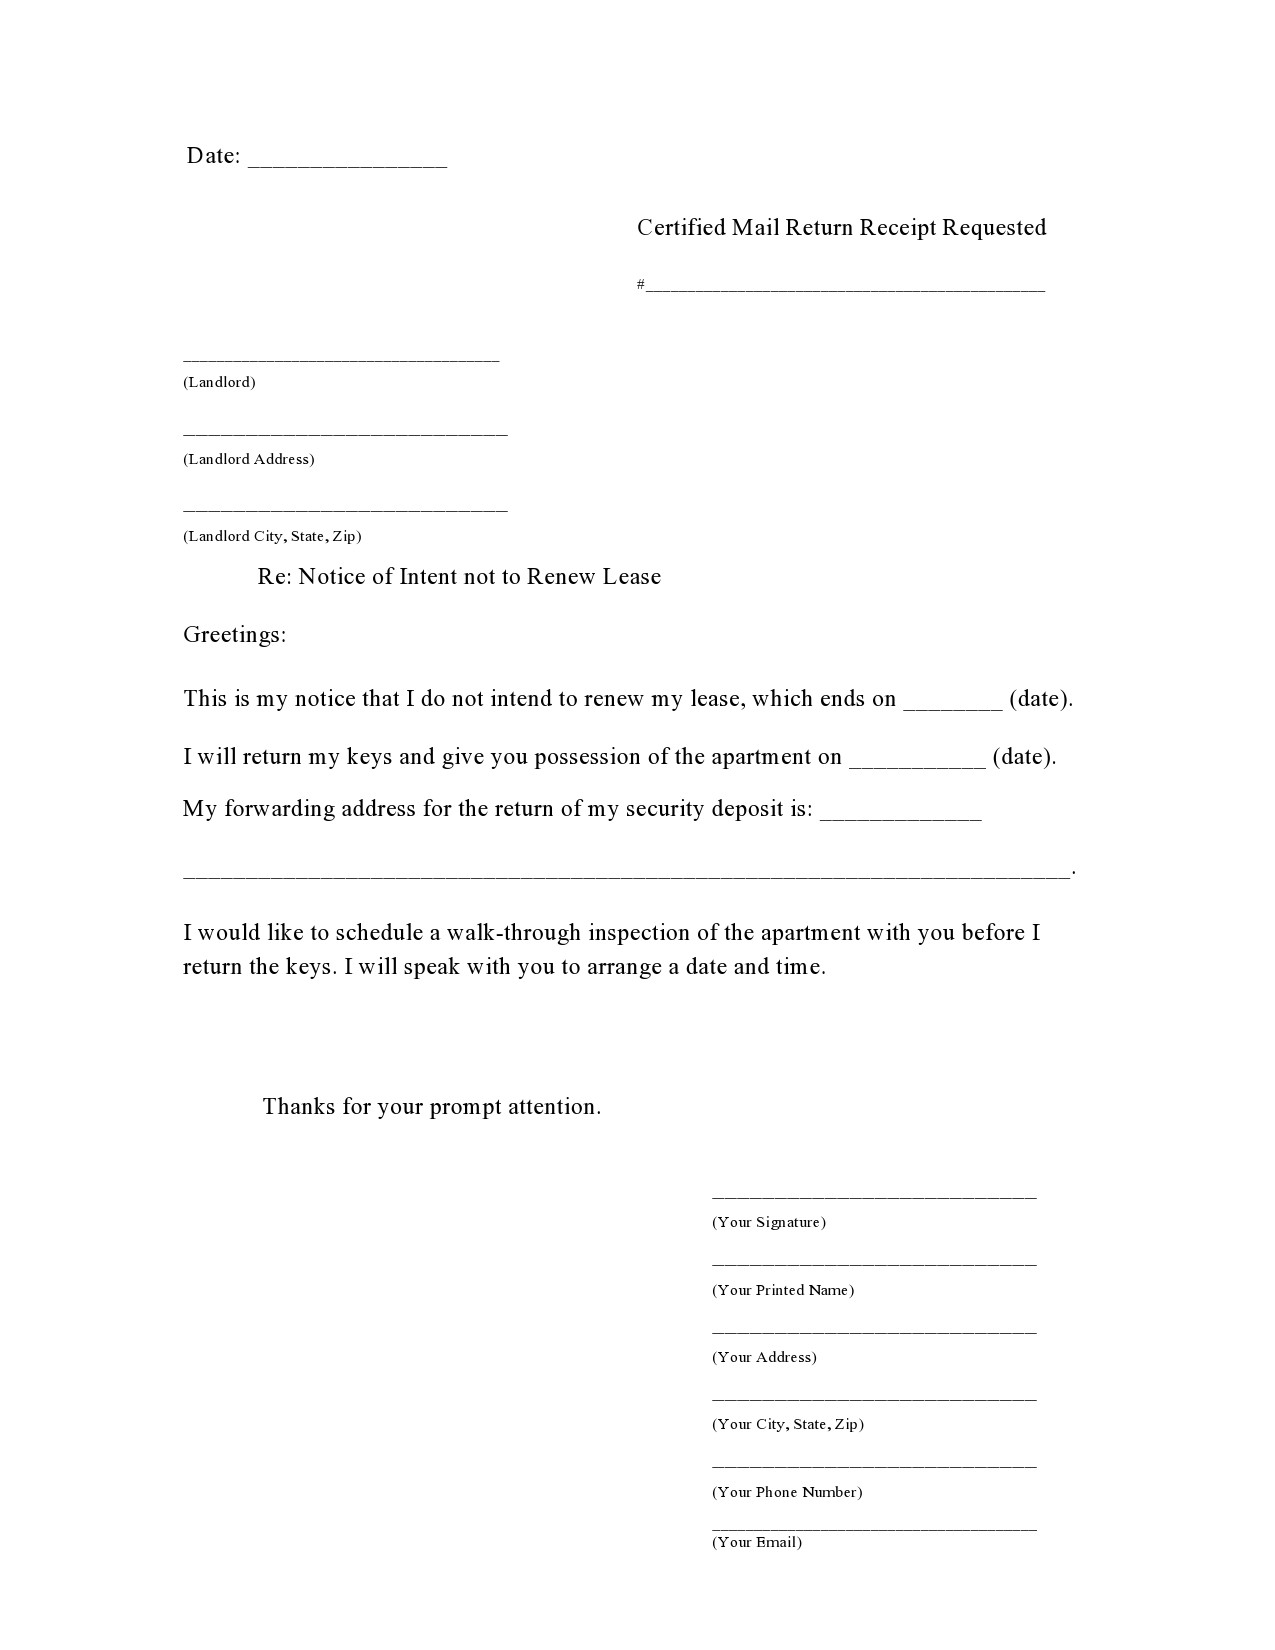 Free not renewing lease letter 04